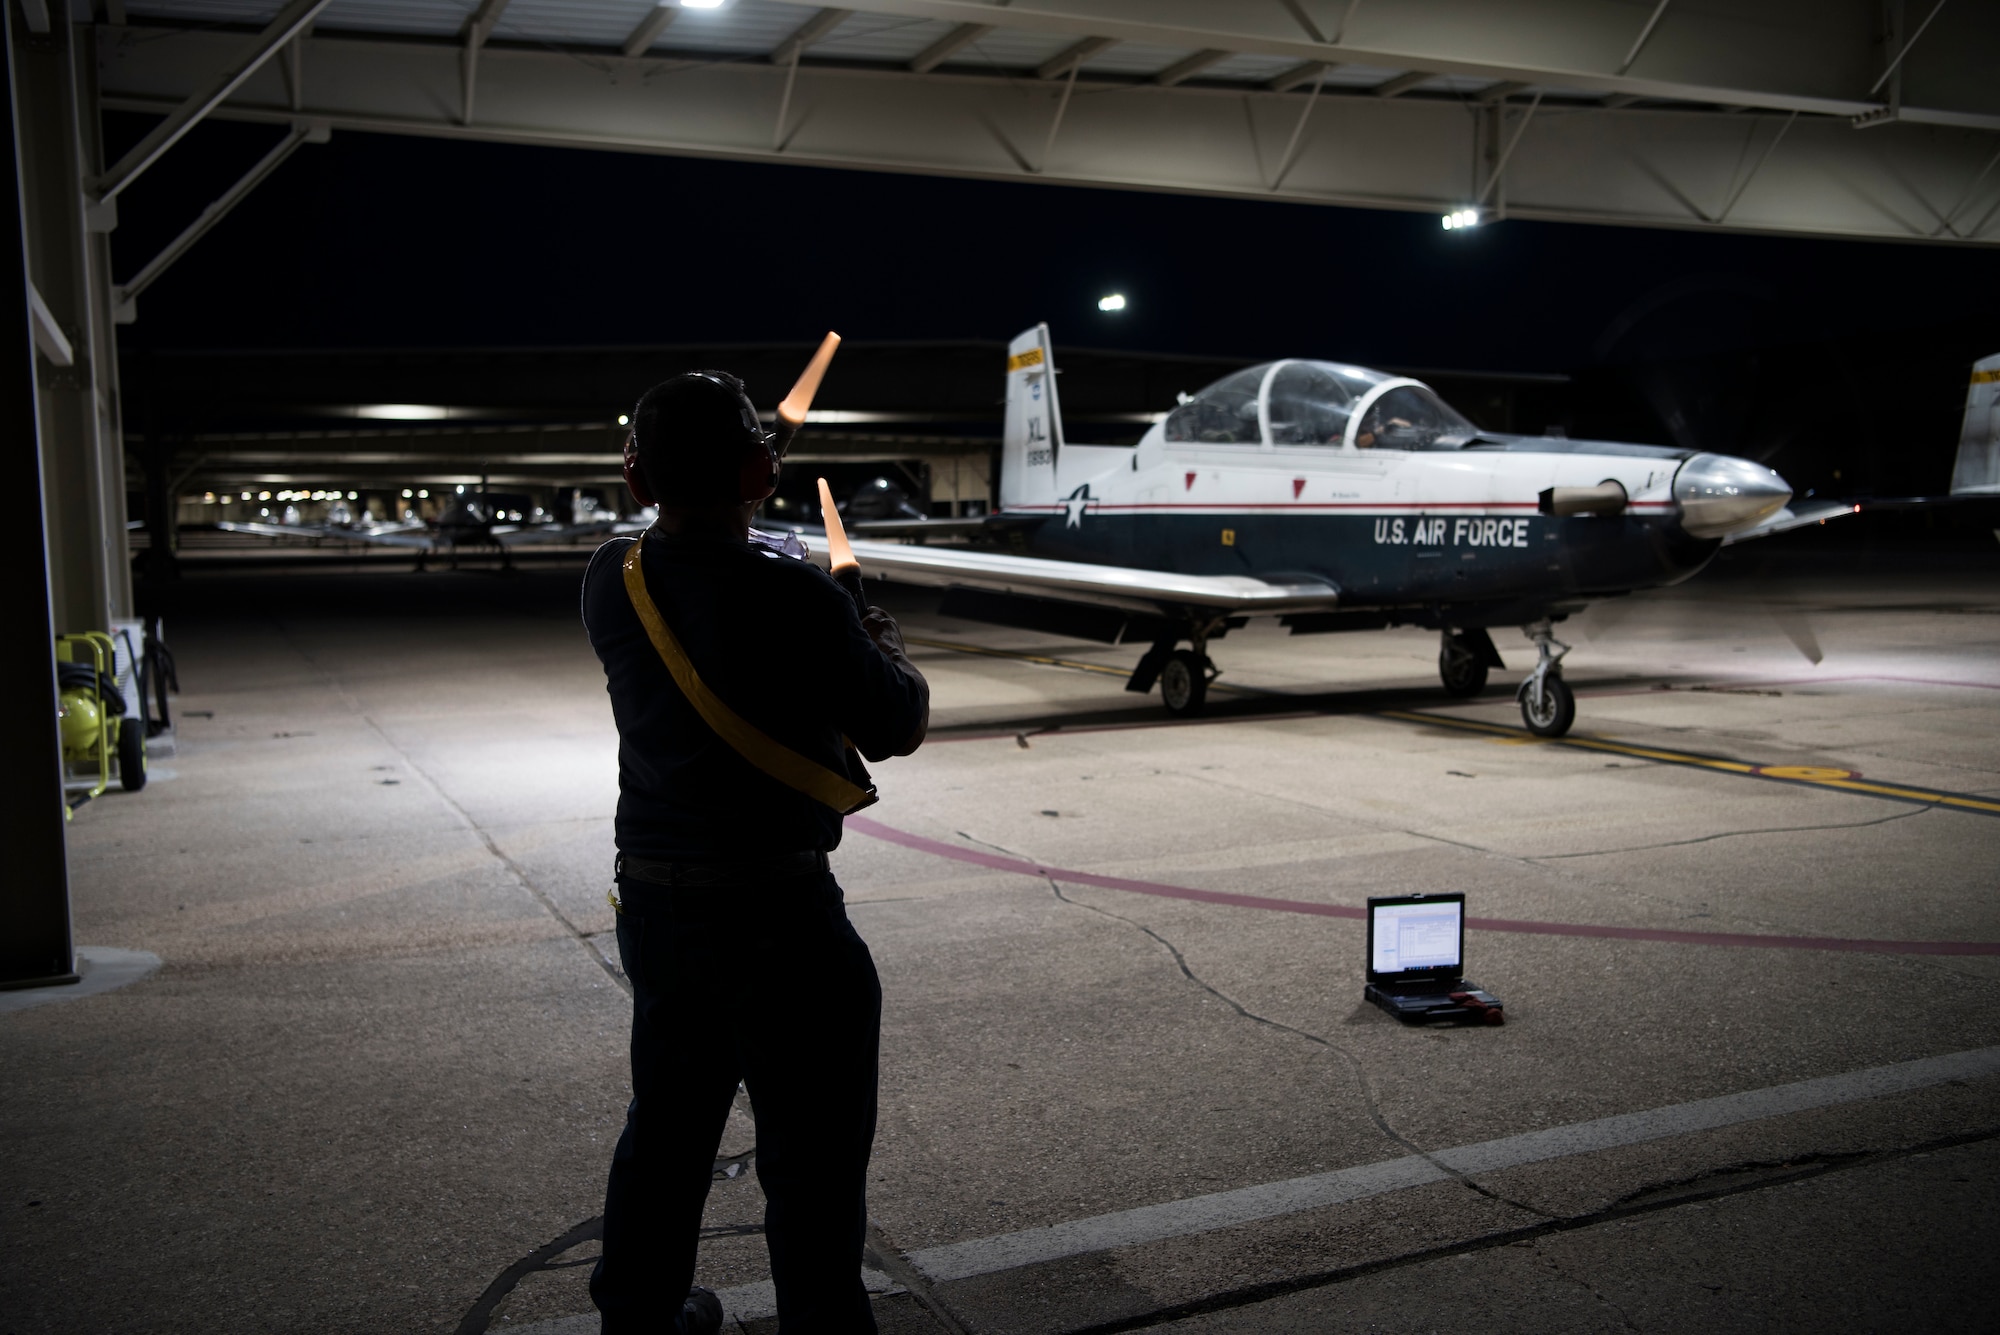 First Lt. Benjamin Peña and 1st Lt. Nicholas Myers, 85th Flying Training Squadron instructor pilots, place items inside a T-6A Texan II before takeoff on Sept. 18, 2019 at Laughlin Air Force Base, Texas. Night flying at a Specialized Undergraduate Pilot Training base allows not only more hours in the sky, but it also provides a variety experience so pilots can become accustomed to instrument flying. (U.S. Air Force photo by Senior Airman Marco A. Gomez)